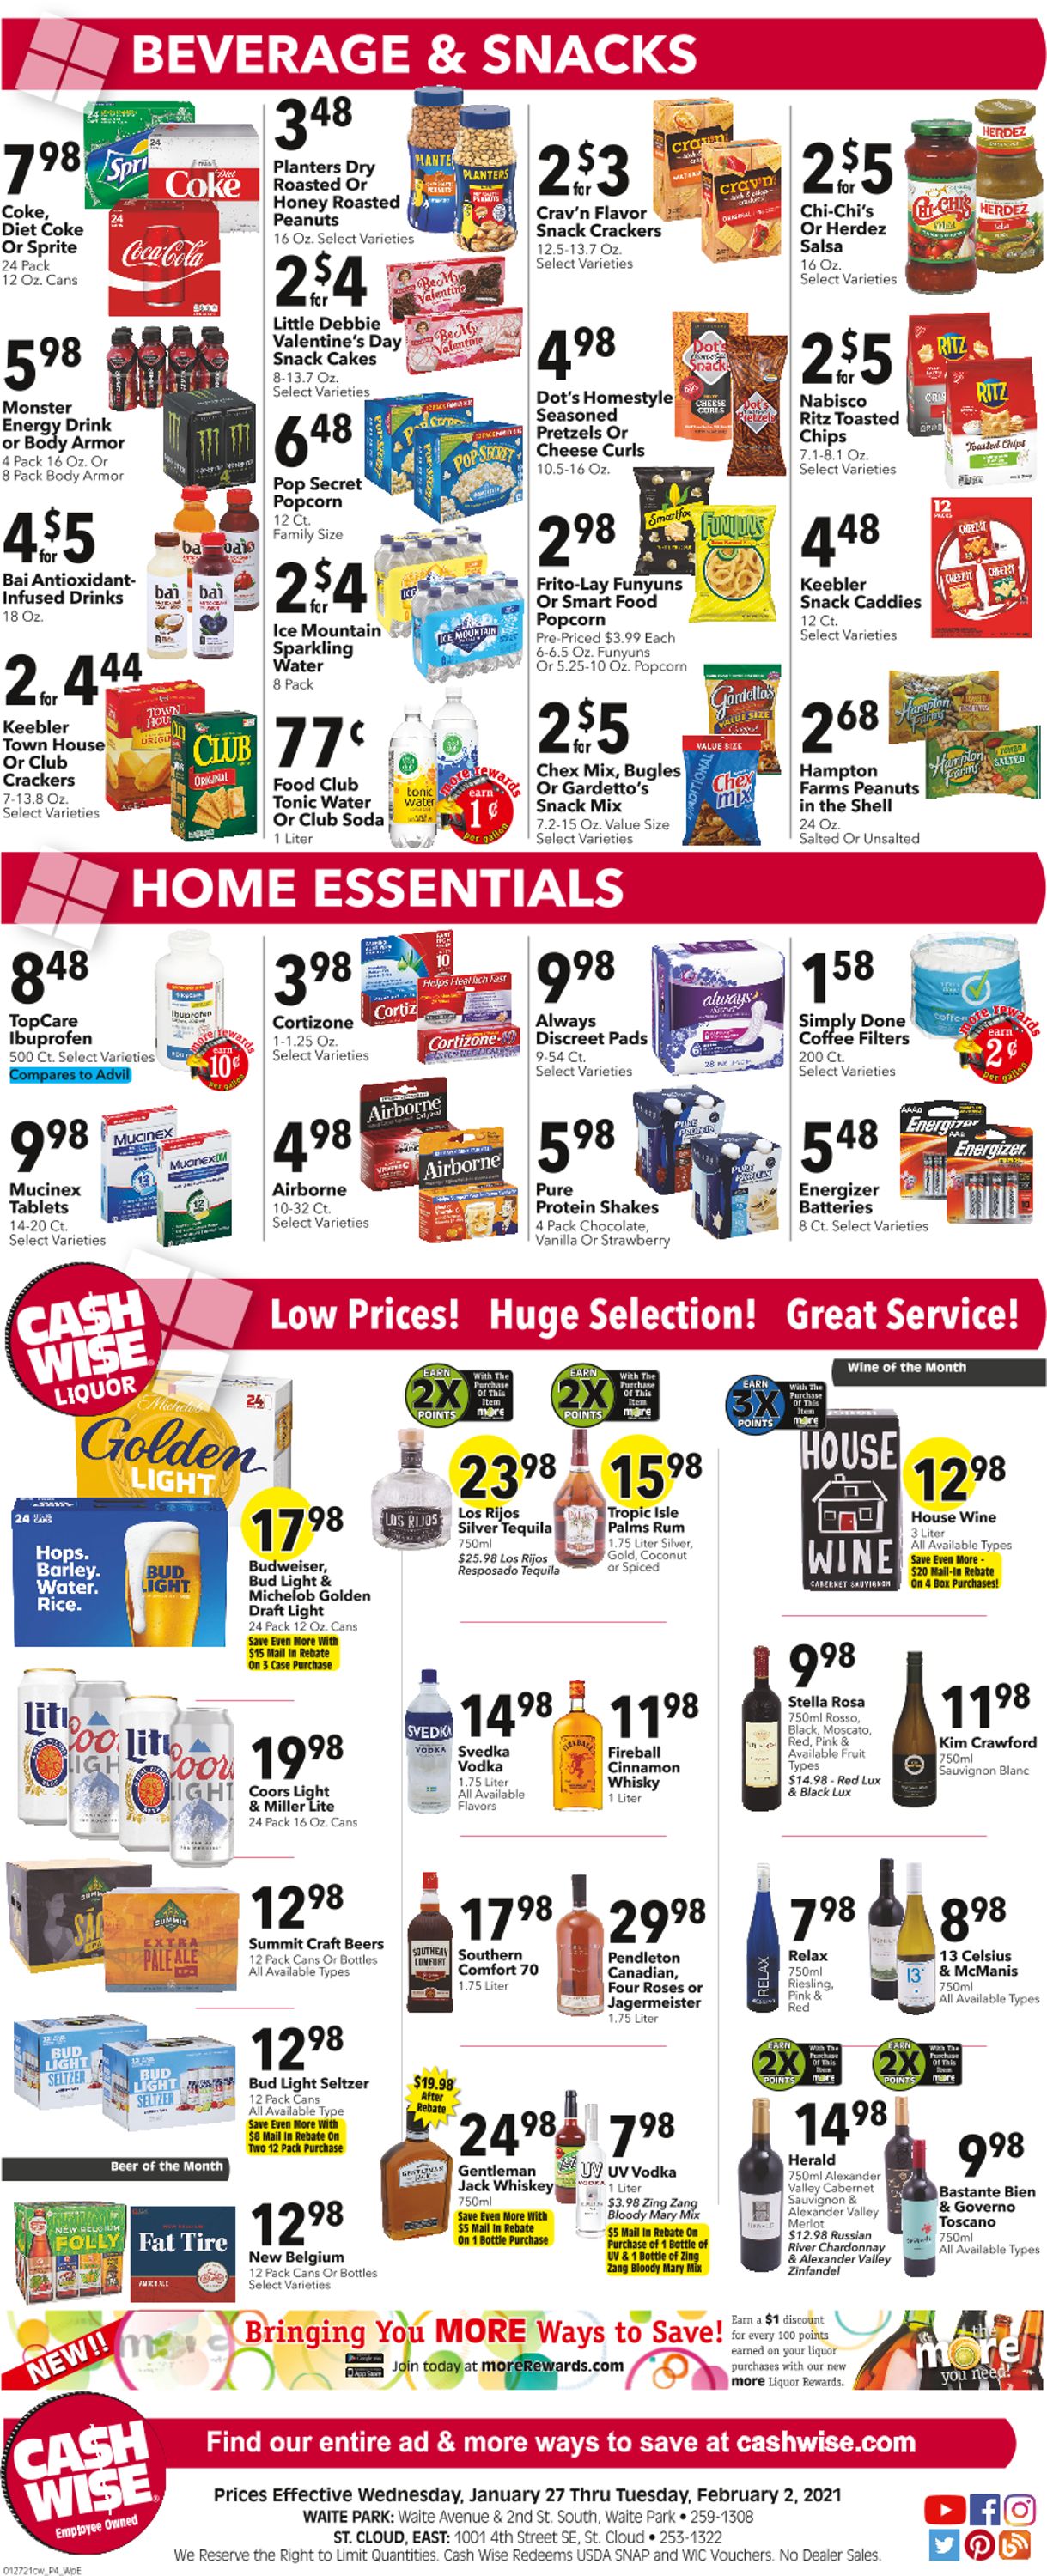 Cash Wise Weekly Ad Circular - valid 01/27-02/02/2021 (Page 4)